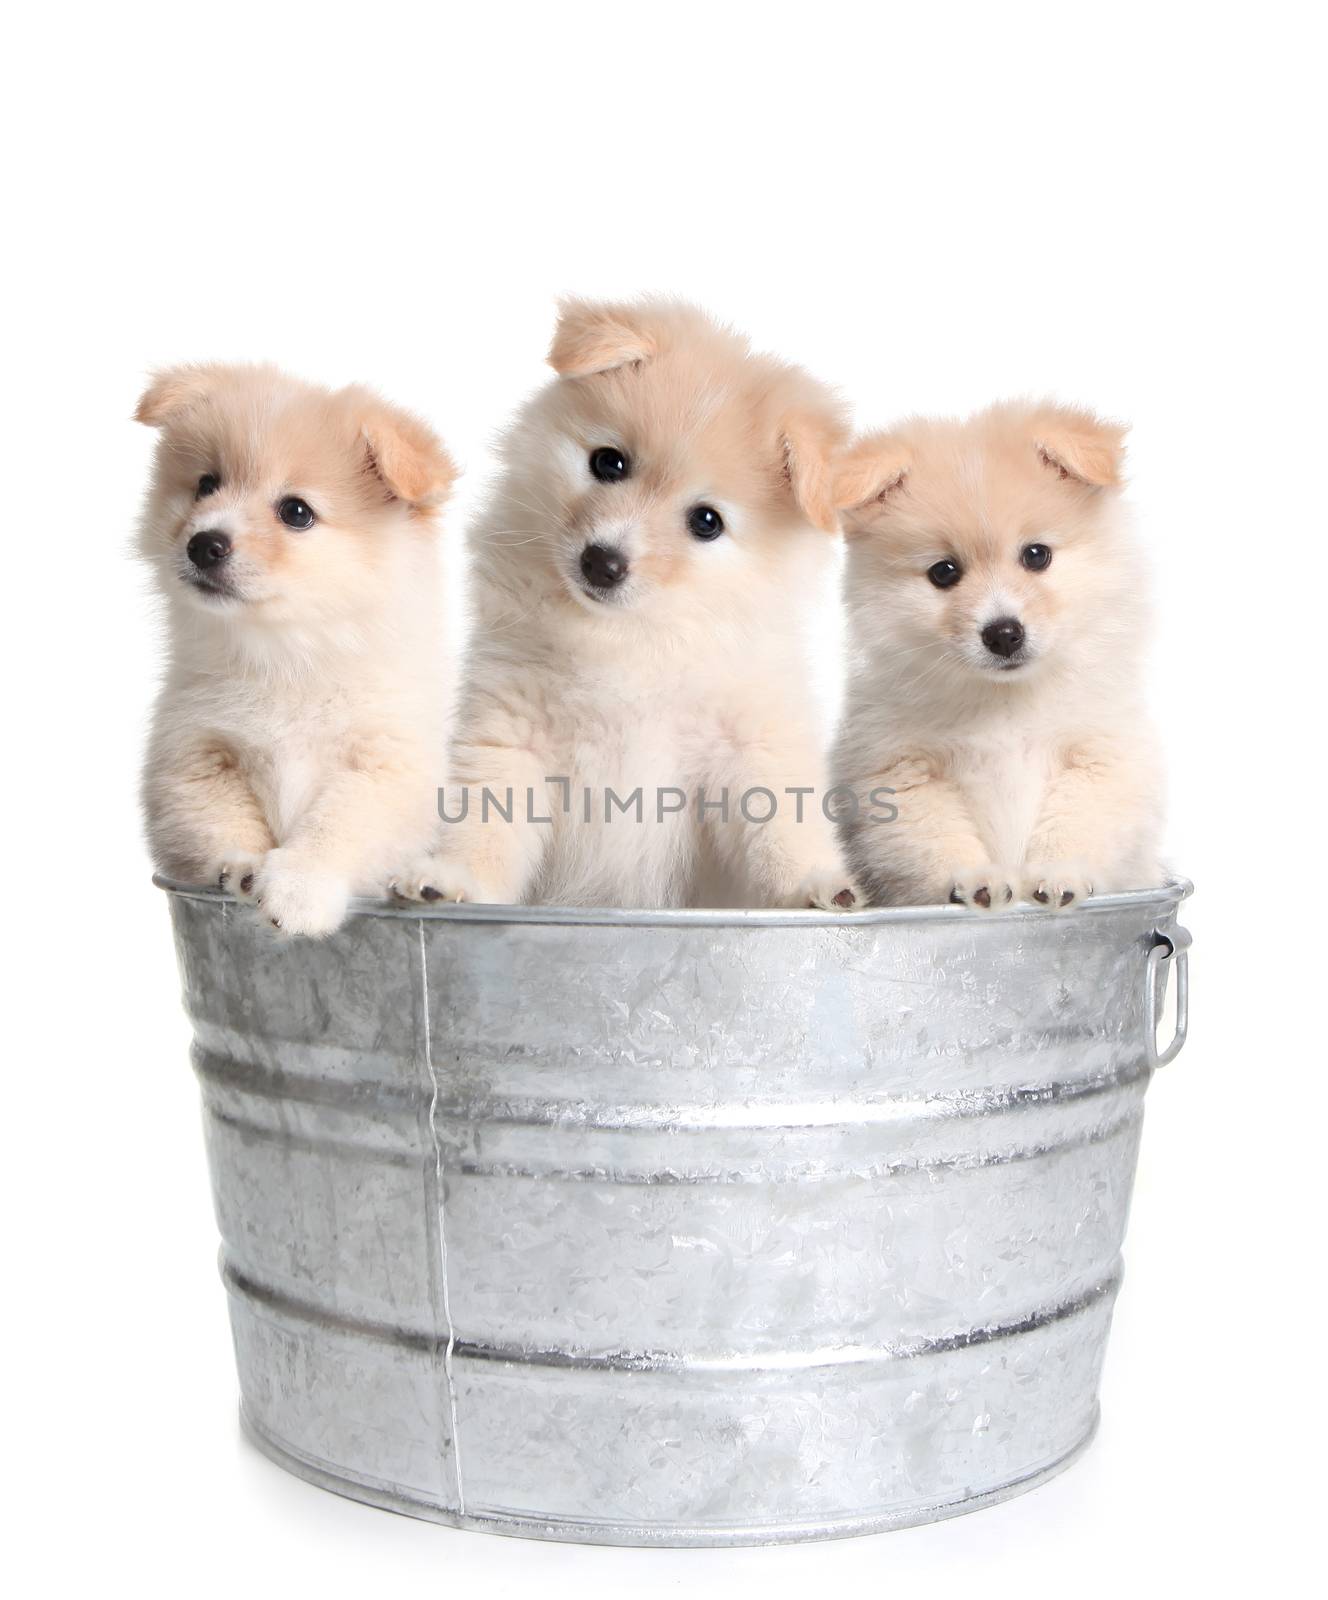 Cute Puppies in an Old Silver Washtub on White Background